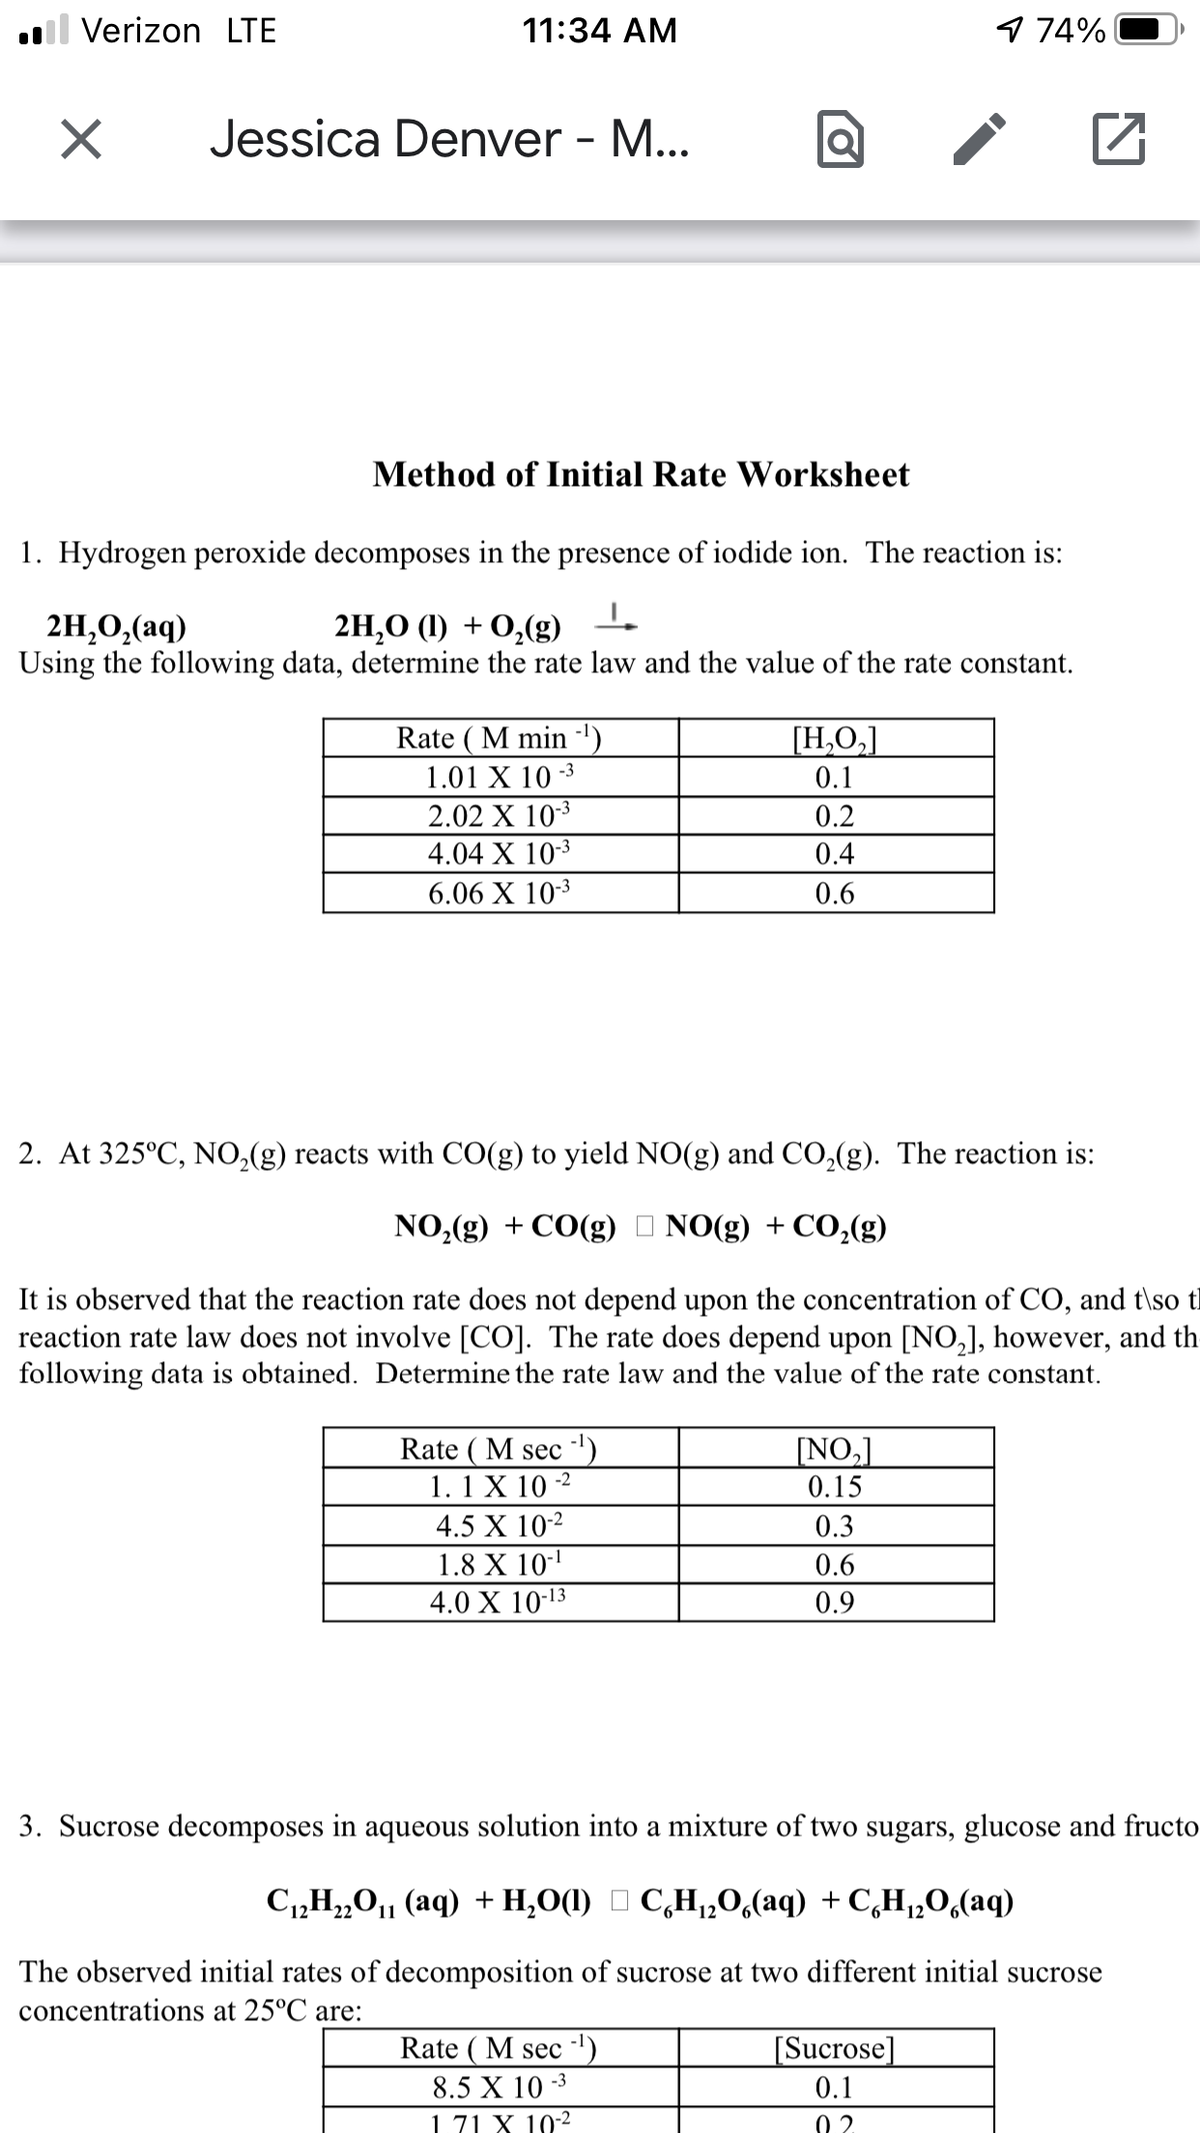 ll Verizon LTE
11:34 AM
974%
Jessica Denver - M...
Method of Initial Rate Worksheet
1. Hydrogen peroxide decomposes in the presence of iodide ion. The reaction is:
2H,0,(aq)
Using the following data, determine the rate law and the value of the rate constant.
2H,О () + 0,(g)
Rate ( M min ')
1.01 X 10 -3
[H,O,]
0.1
2.02 X 103
0.2
4.04 X 103
0.4
6.06 X 103
0.6
2. At 325°C, NO,(g) reacts with CO(g) to yield NO(g) and CO,(g). The reaction is:
NO,(g) + CO(g) I NO(g) + CO,(g)
It is observed that the reaction rate does not depend upon the concentration of CO, and t\so tl
reaction rate law does not involve [CO]. The rate does depend upon [NO,], however, and th
following data is obtained. Determine the rate law and the value of the rate constant.
Rate ( M sec ')
1. 1 X 10 -2
NO,]
0.15
4.5 X 10-2
0.3
1.8 X 10-
4.0 X 10-13
0.6
0.9
3. Sucrose decomposes in aqueous solution into a mixture of two sugars, glucose and fructo
C1,H„0,, (aq) + H,O(1) O C,H,,0,(aq) + C,H,,O,(aq)
22
The observed initial rates of decomposition of sucrose at two different initial sucrose
concentrations at 25°C are:
Rate ( M sec ')
[Sucrose]
8.5 X 10 -3
0.1
1.71 X 102
